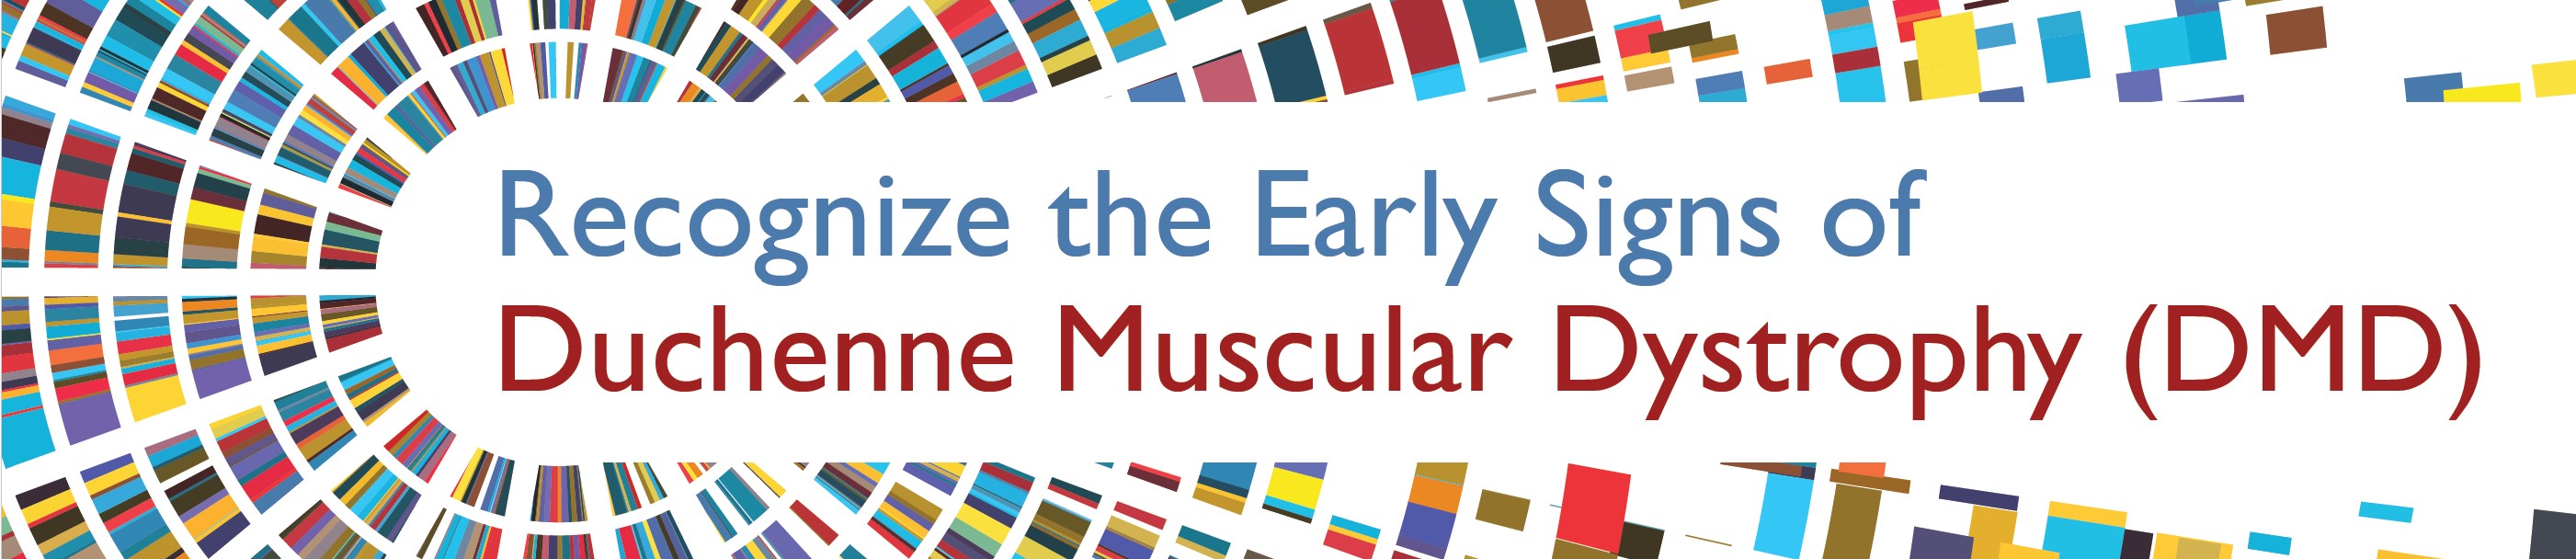 Recognize the Early Signs of Duchenne Muscular Dystrophy (DMD)